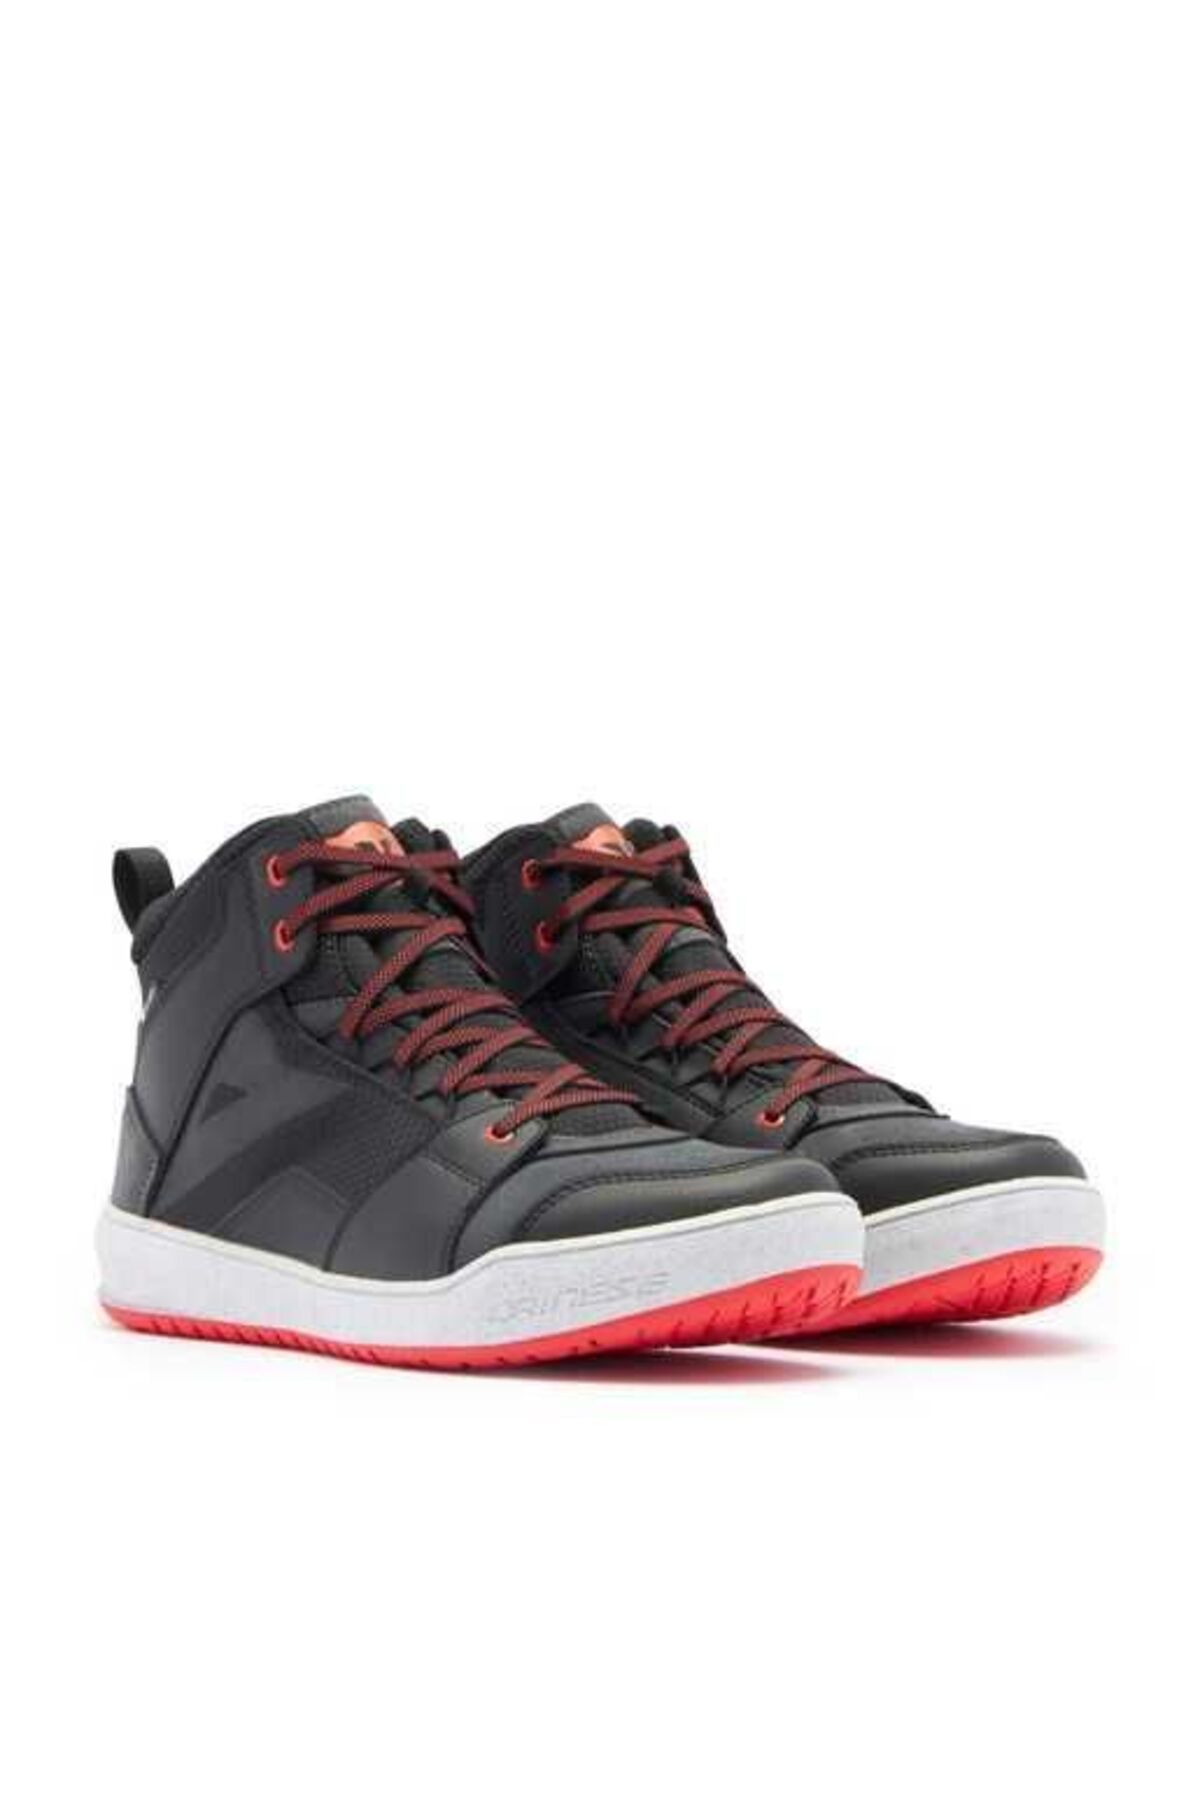 Dainese Ayakkabı/ Suburb D-wp Shoes Black/white/red